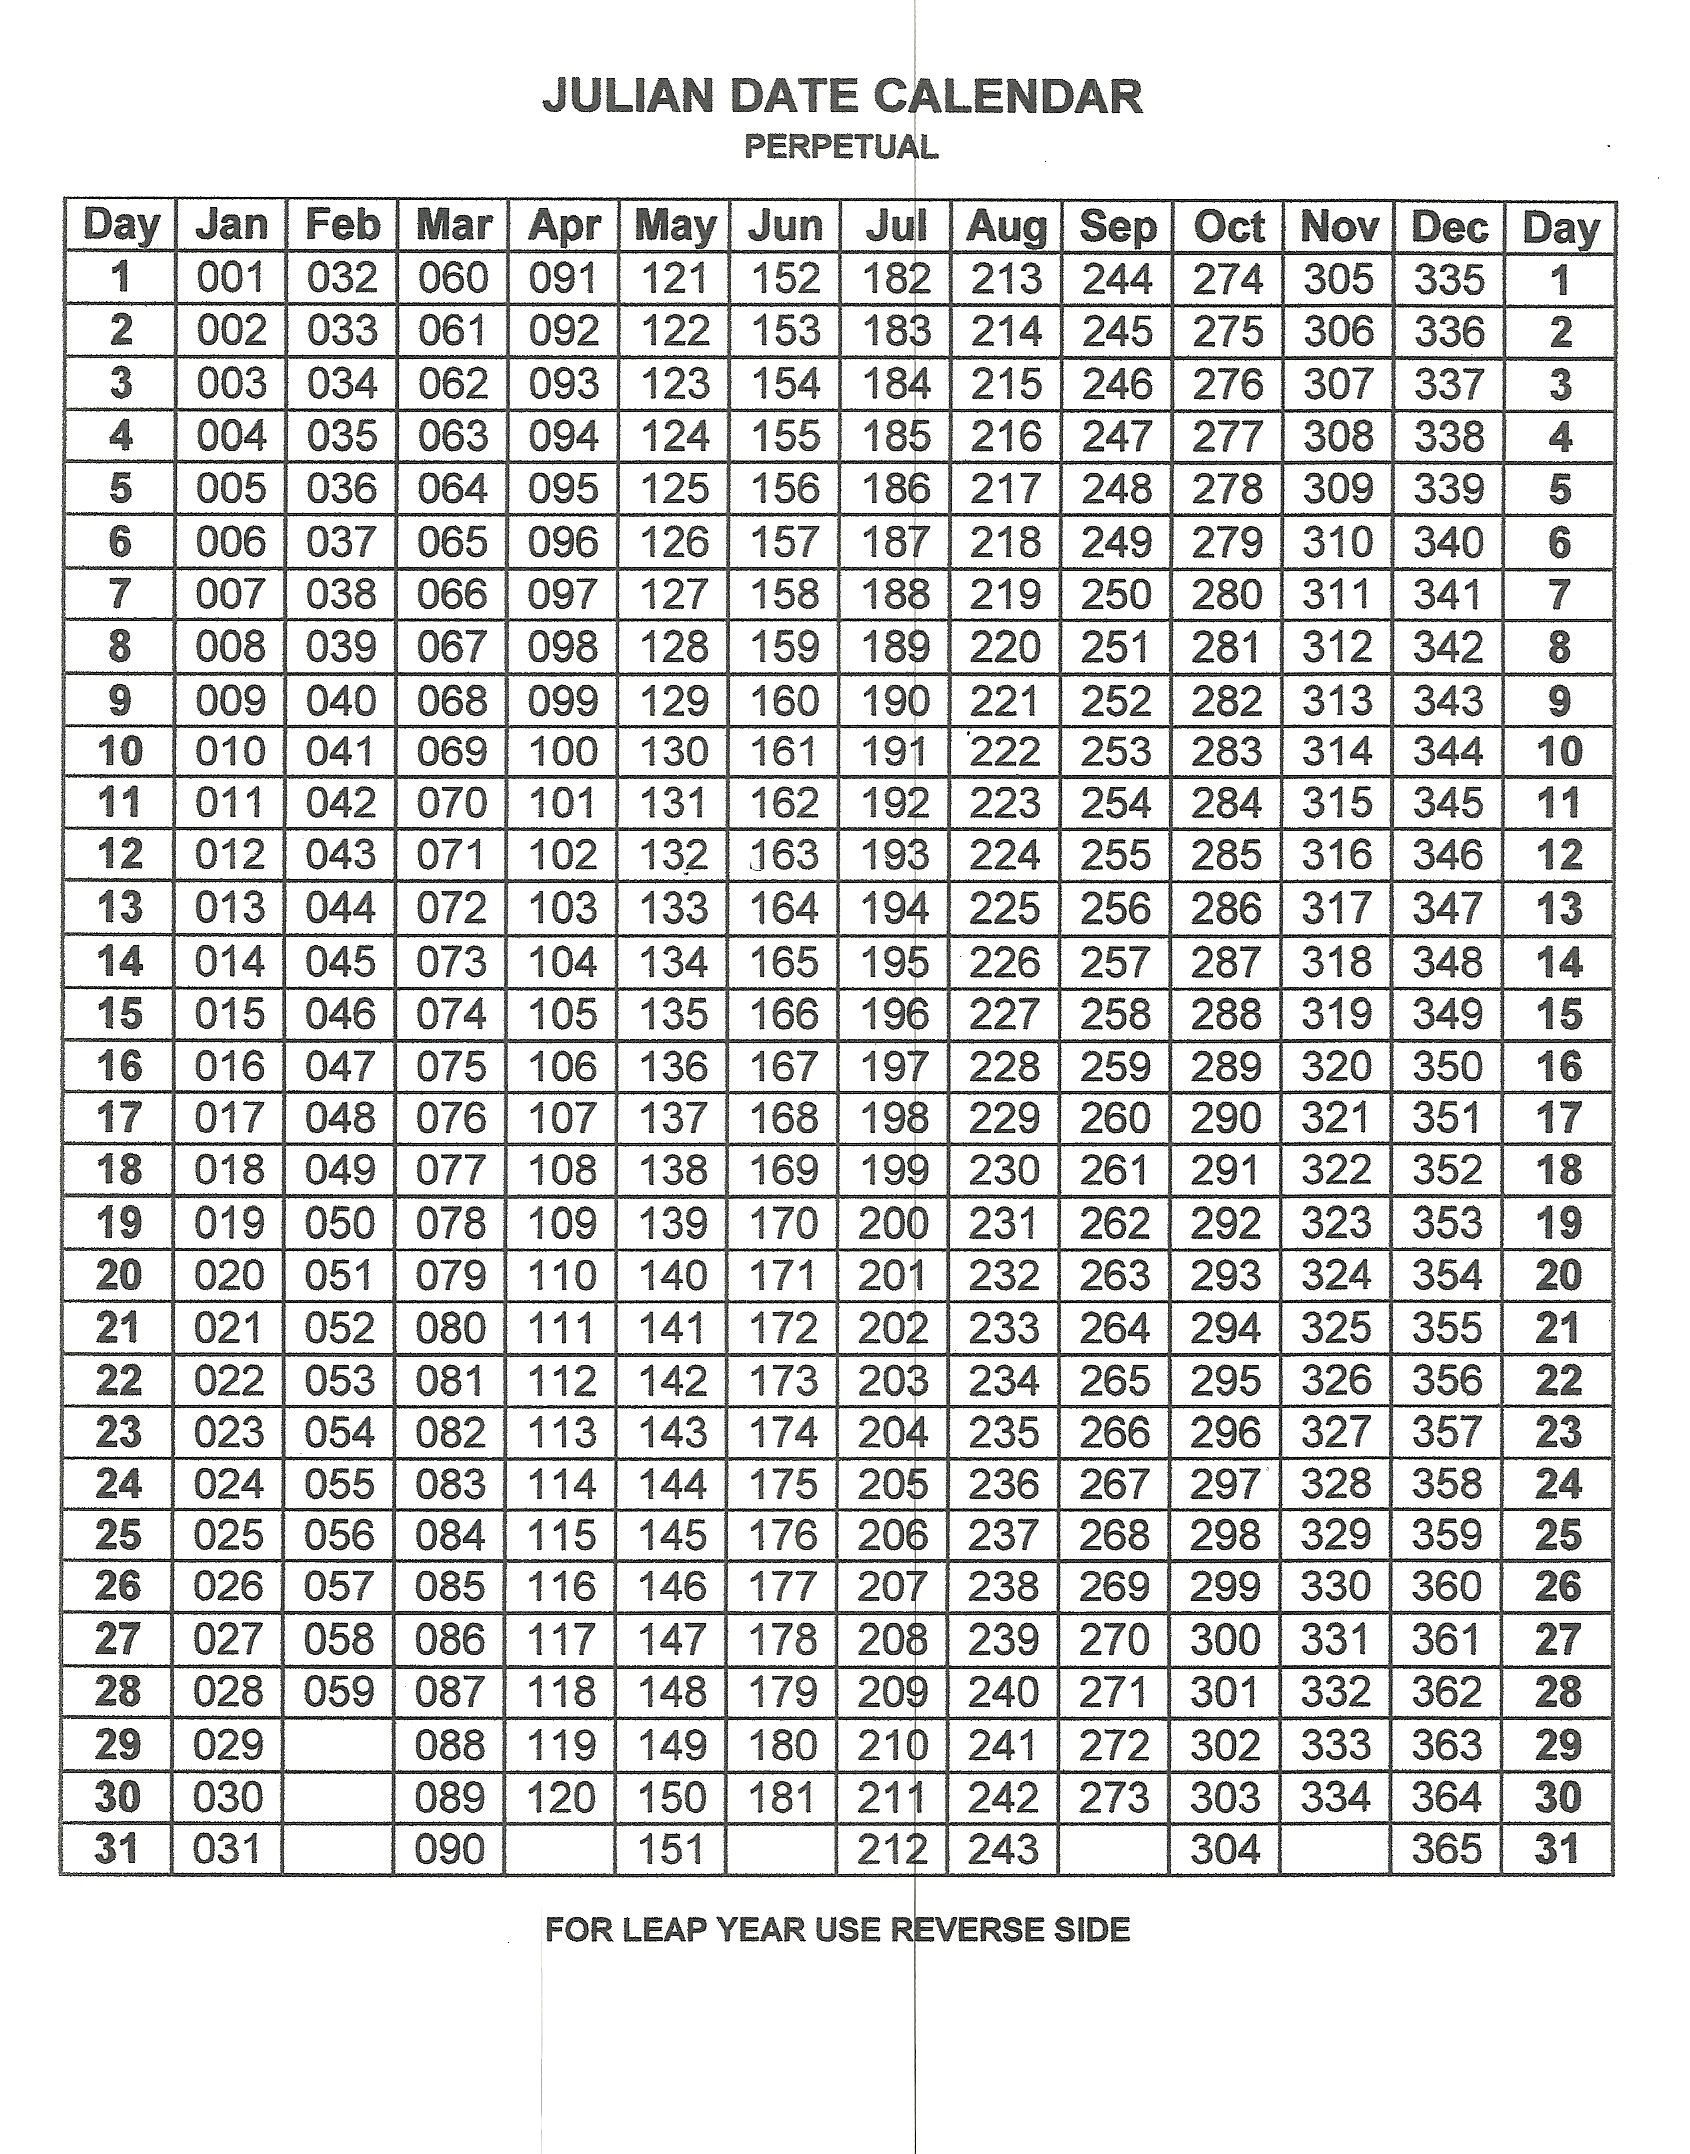 What Are Julian Dates On A Calendar | Example Calendar Printable within Quadax Julian Date Calendar 2020